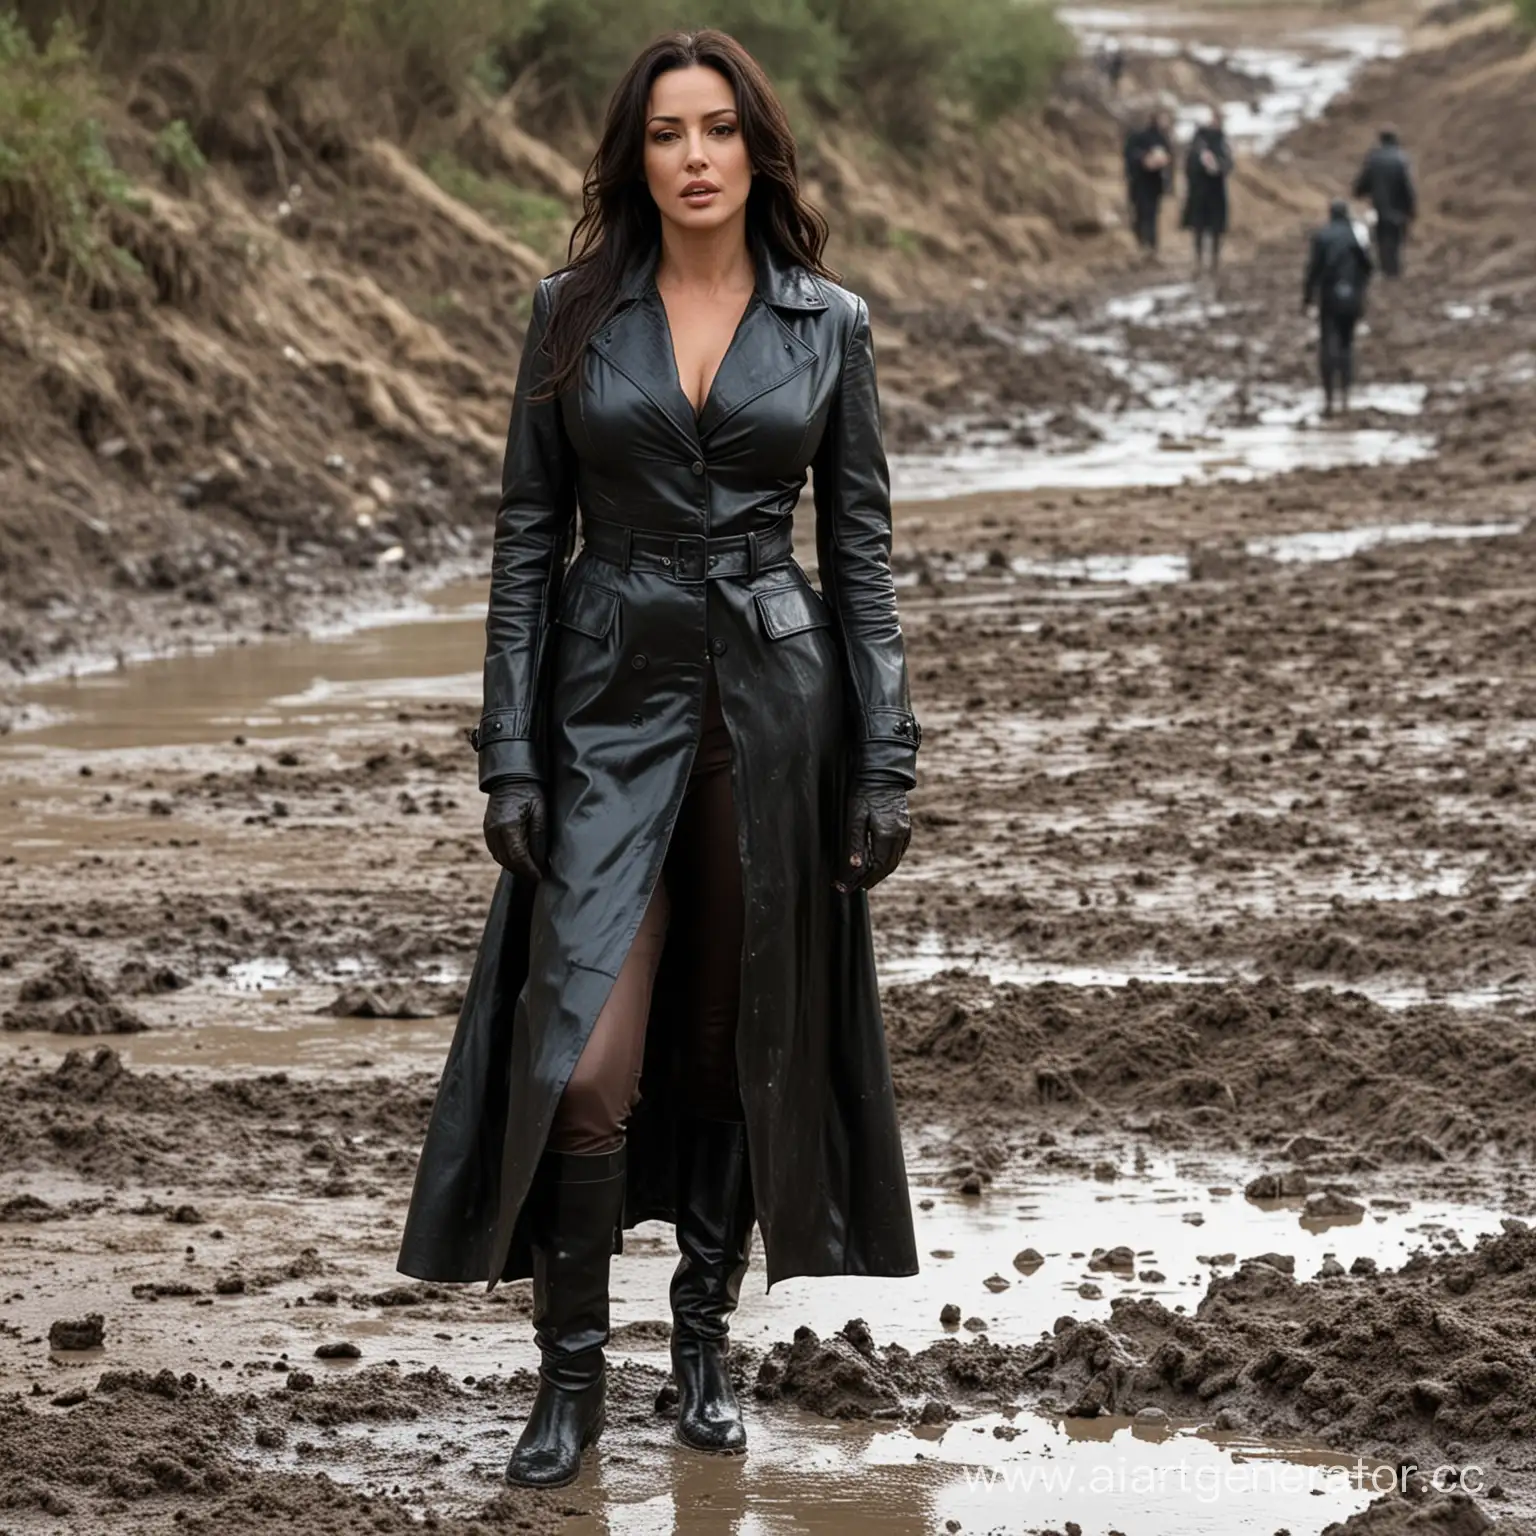 Monica Bellucci in a dirty long leather coat in a dirty pit standing knee deep in mud dirty